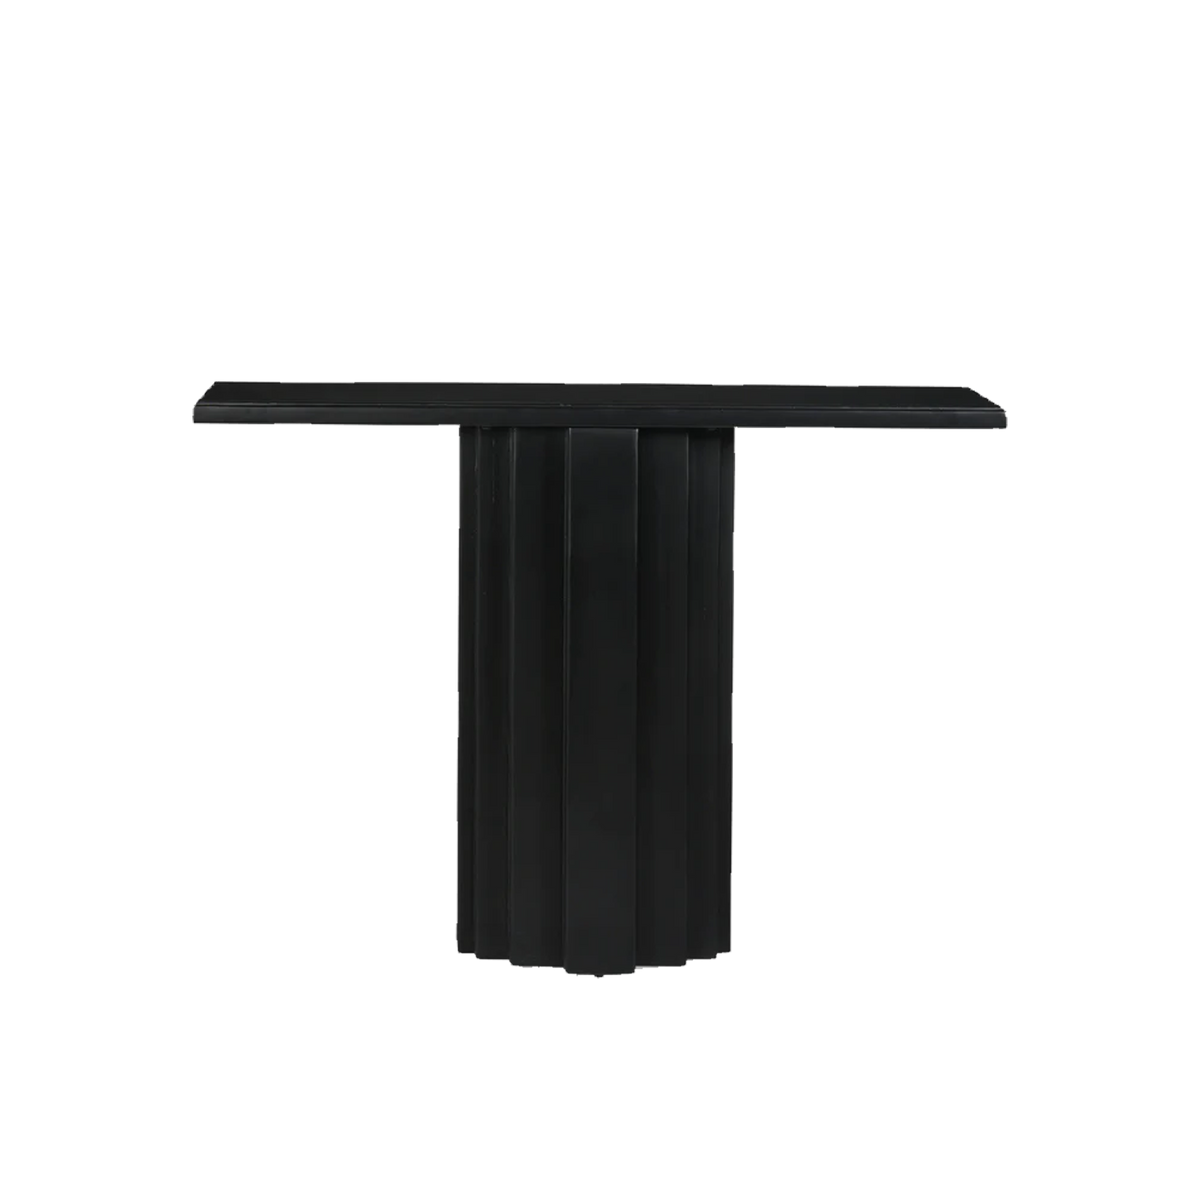 Artfully combining Modern Art Deco-inspired detailing with a clean architectural form, the Donovan Console Table offers a dynamic and sculptural accent to your space.